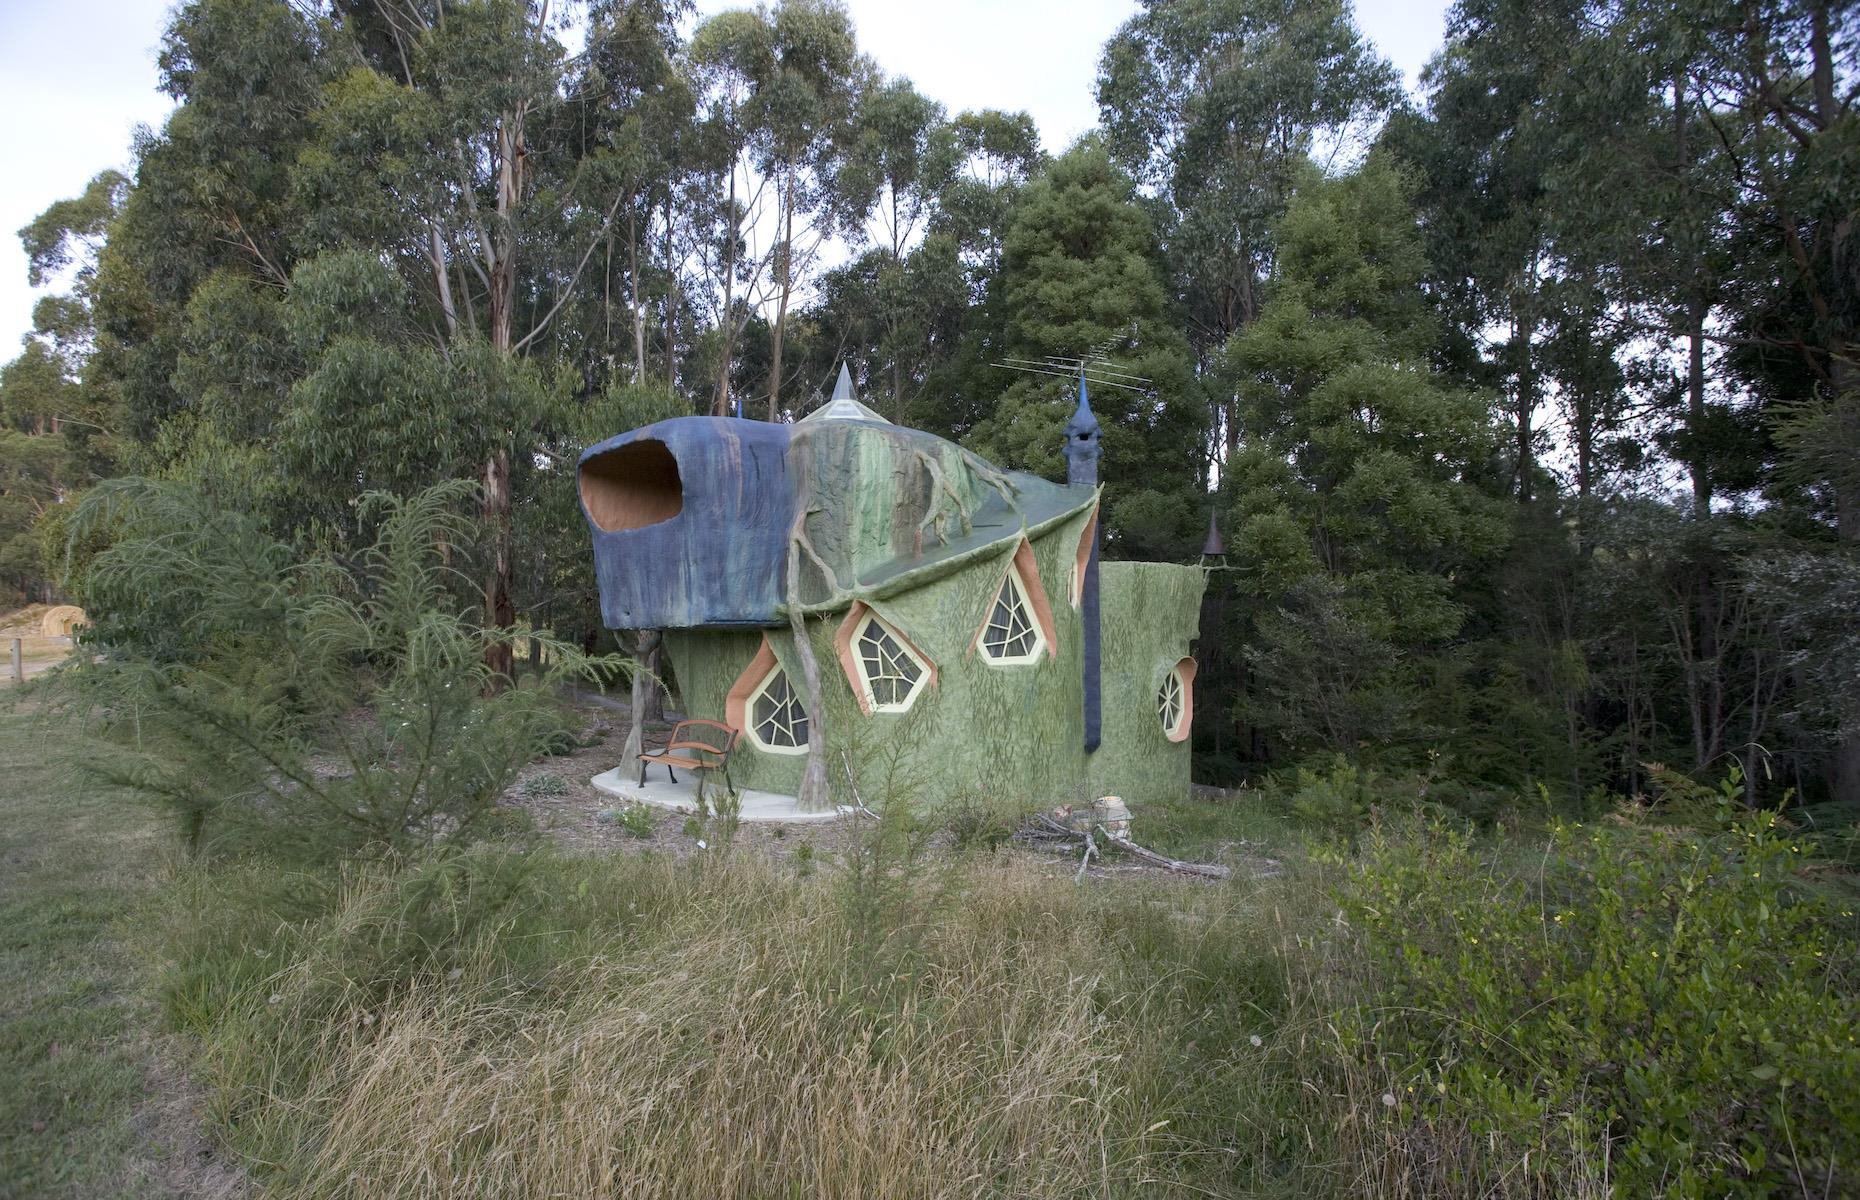 <p>Surrounded by forest at the foothills of Mount Baw Baw, <a href="https://www.miramira.com.au">this fantastical retreat</a> makes for a magical escape in Victoria's Gippsland. Hidden around the property’s 22 acres are four wildly different properties: there’s the Cave House, Tanglewood (an enchanted forest sculpture – pictured), the Japanese Zen Retreat and the English Cottage. Wherever guests choose to bed down, they’re likely to be bewitched by both Mira Mira's fairy-tale feel and the resident wombats, as well as the wild wallabies and possums that roam the bush.</p>  <p><strong><a href="https://www.loveexploring.com/galleries/92400/25-incredible-places-you-wont-believe-are-in-australia?page=1">Check out these 25 incredible places you won't believe are in Australia</a></strong></p>